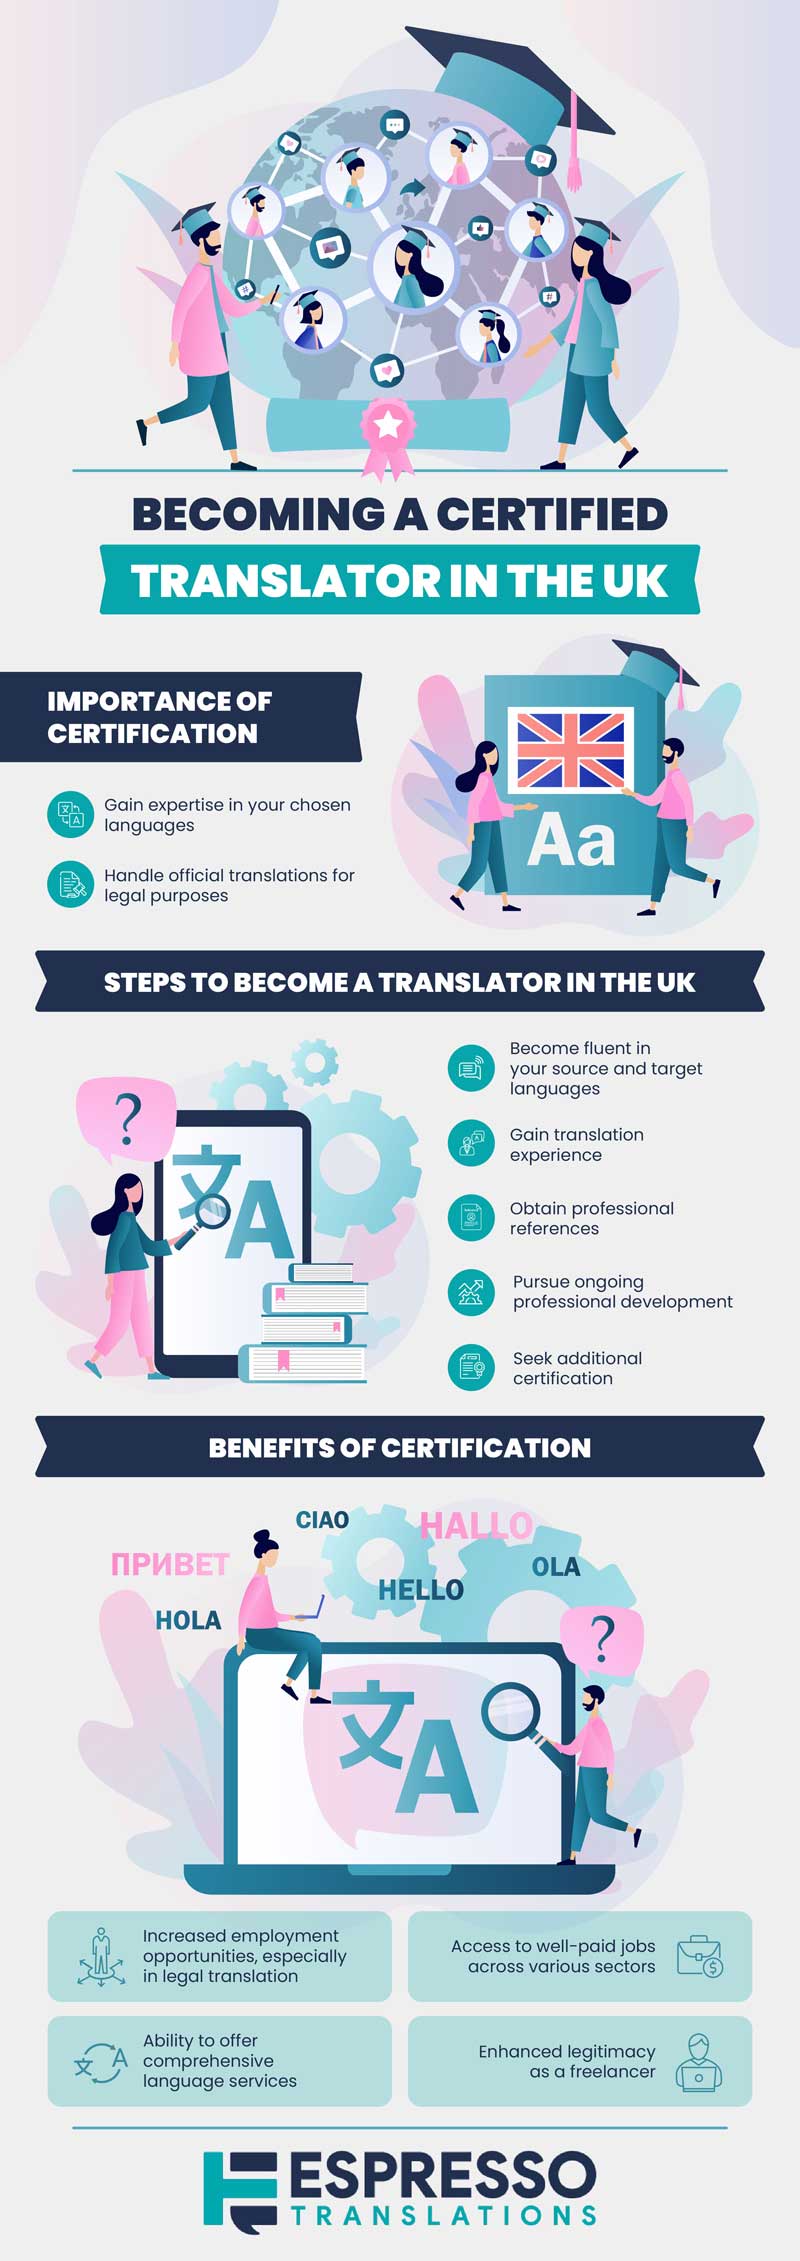 How to become a certified official translator in the UK